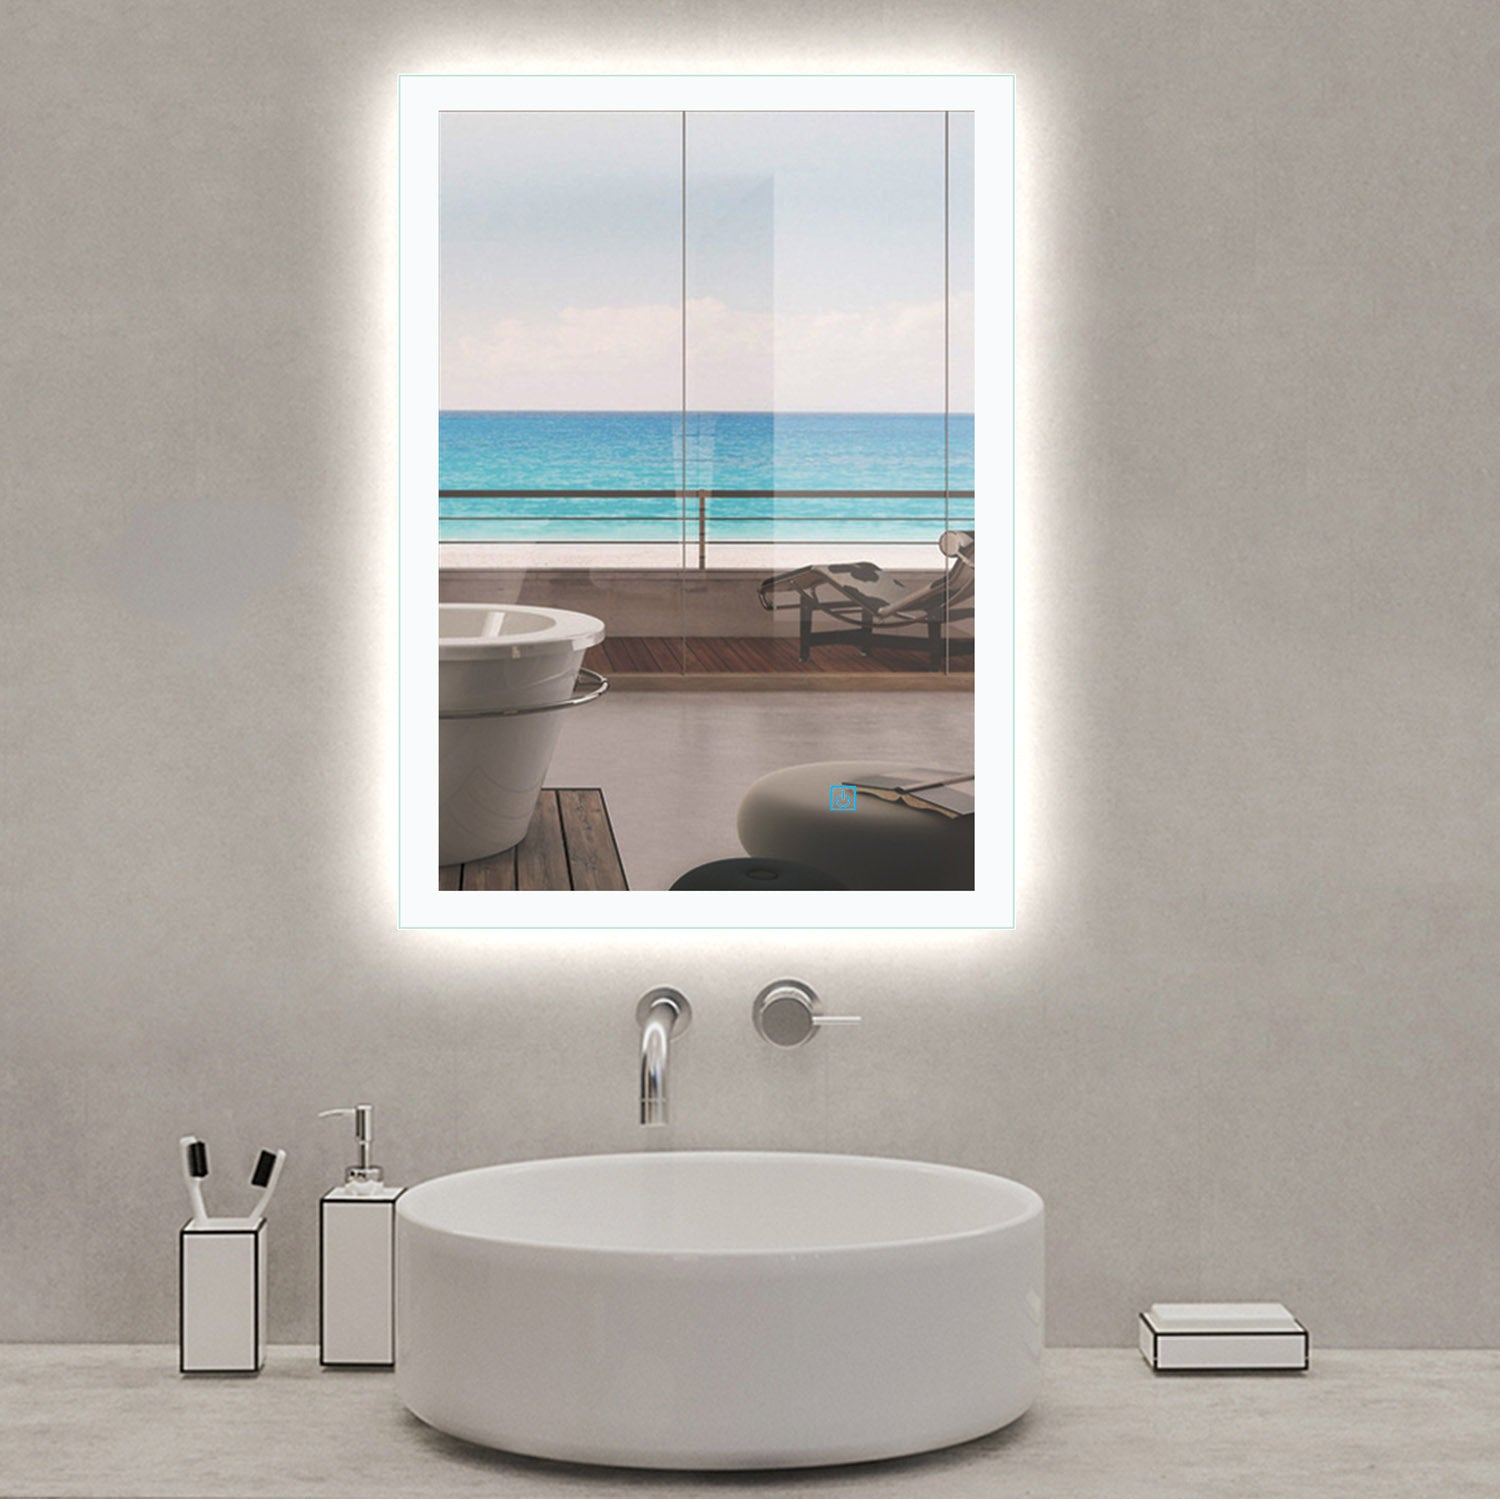 LED Bathroom Mirror with Demister Pad Wall-mounted